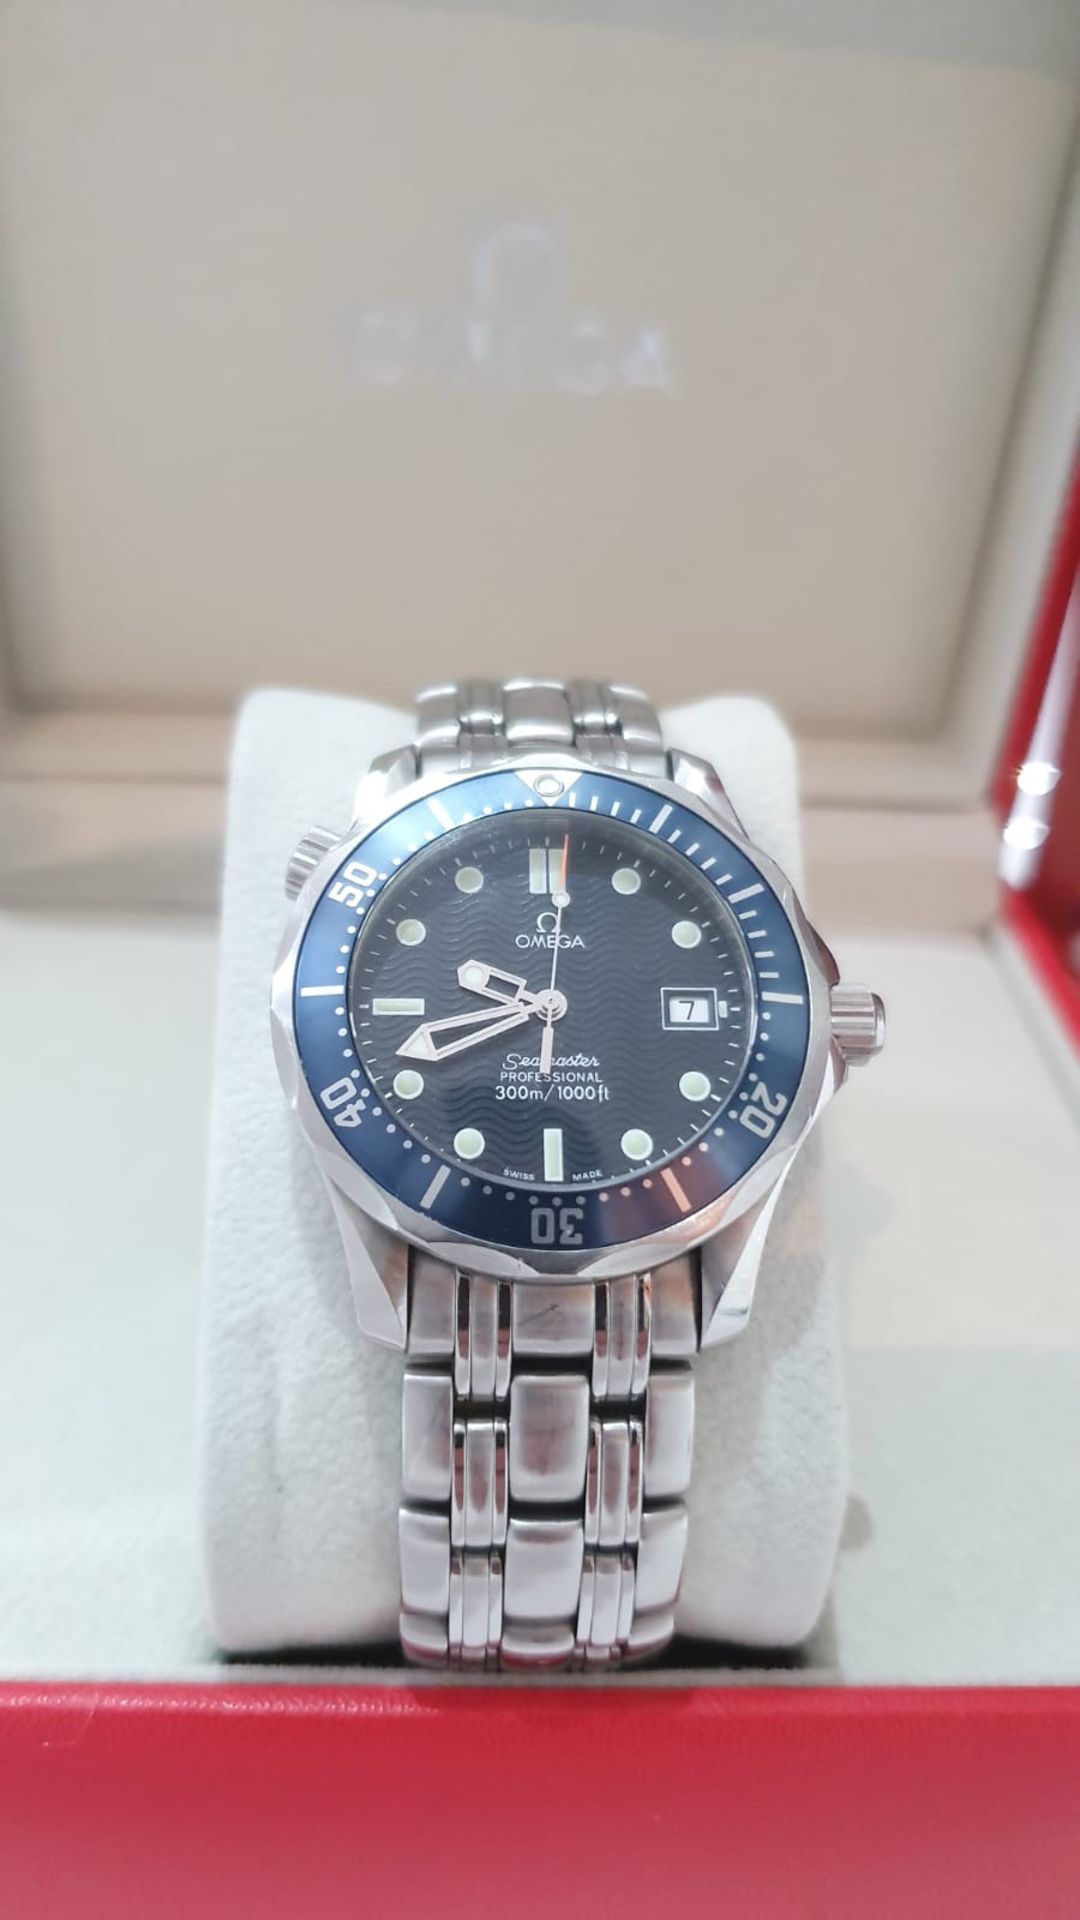 OMEGA SEAMASTER PROFESSIONAL 300m James Bond Navy Blue Wave Dial Swiss Mens Watch - Image 3 of 12